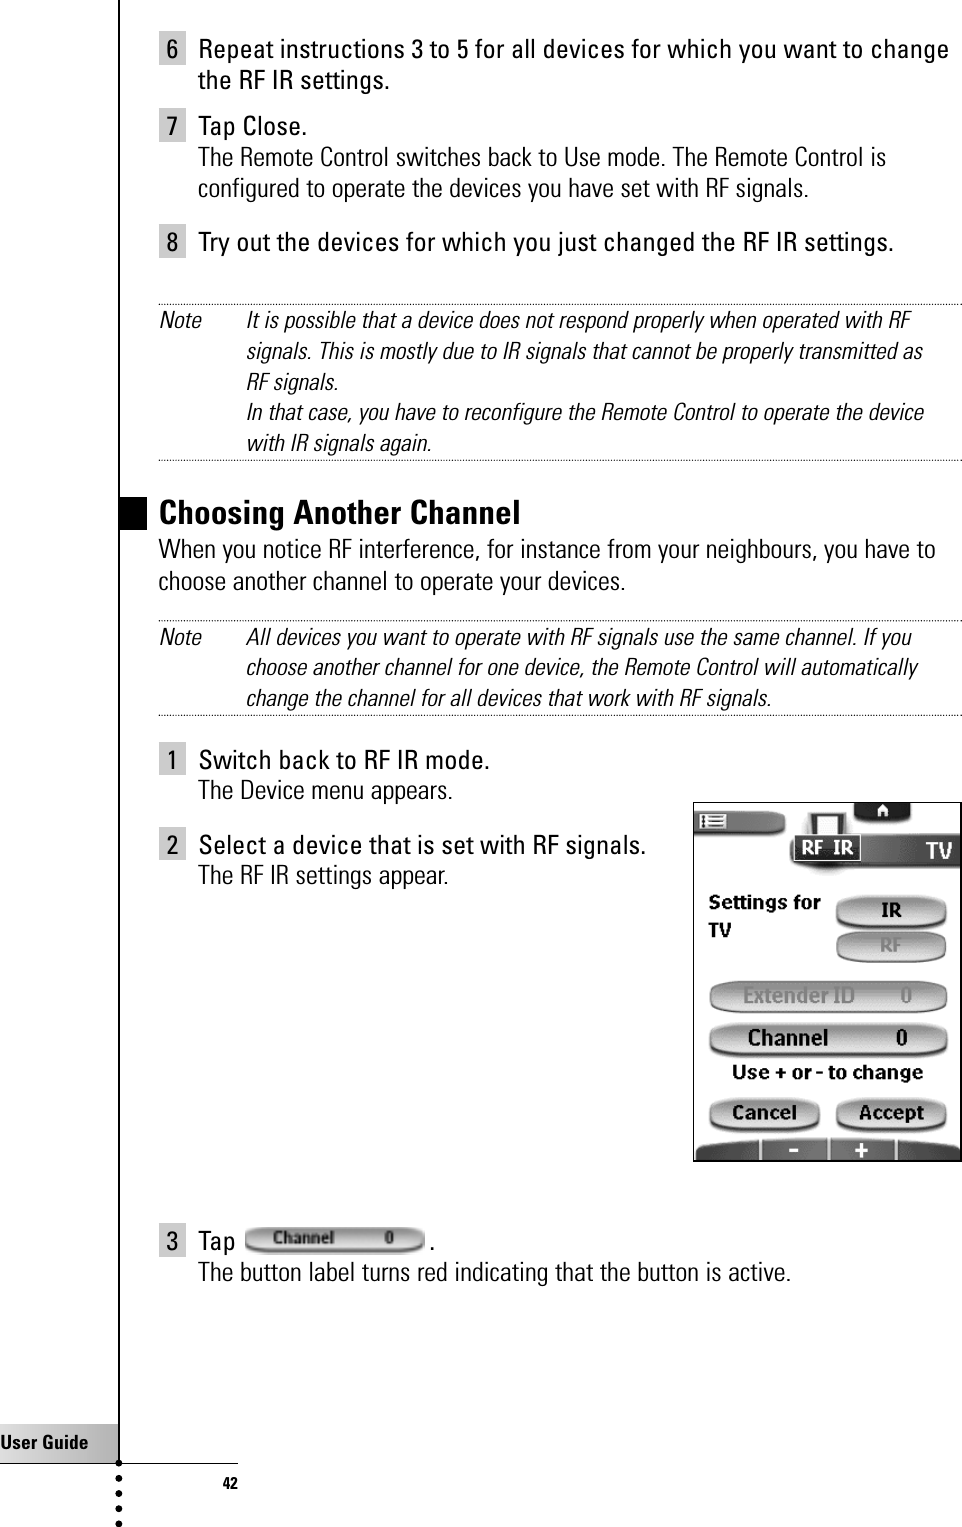 User Guide426 Repeat instructions 3 to 5 for all devices for which you want to changethe RF IR settings.7 Tap Close.The Remote Control switches back to Use mode. The Remote Control isconfigured to operate the devices you have set with RF signals.8 Try out the devices for which you just changed the RF IR settings.Note It is possible that a device does not respond properly when operated with RFsignals. This is mostly due to IR signals that cannot be properly transmitted as RF signals.In that case, you have to reconfigure the Remote Control to operate the devicewith IR signals again.Choosing Another ChannelWhen you notice RF interference, for instance from your neighbours, you have tochoose another channel to operate your devices.Note All devices you want to operate with RF signals use the same channel. If youchoose another channel for one device, the Remote Control will automaticallychange the channel for all devices that work with RF signals.1 Switch back to RF IR mode.The Device menu appears.2 Select a device that is set with RF signals.The RF IR settings appear.3 Tap .The button label turns red indicating that the button is active.Getting the Maximum out of it